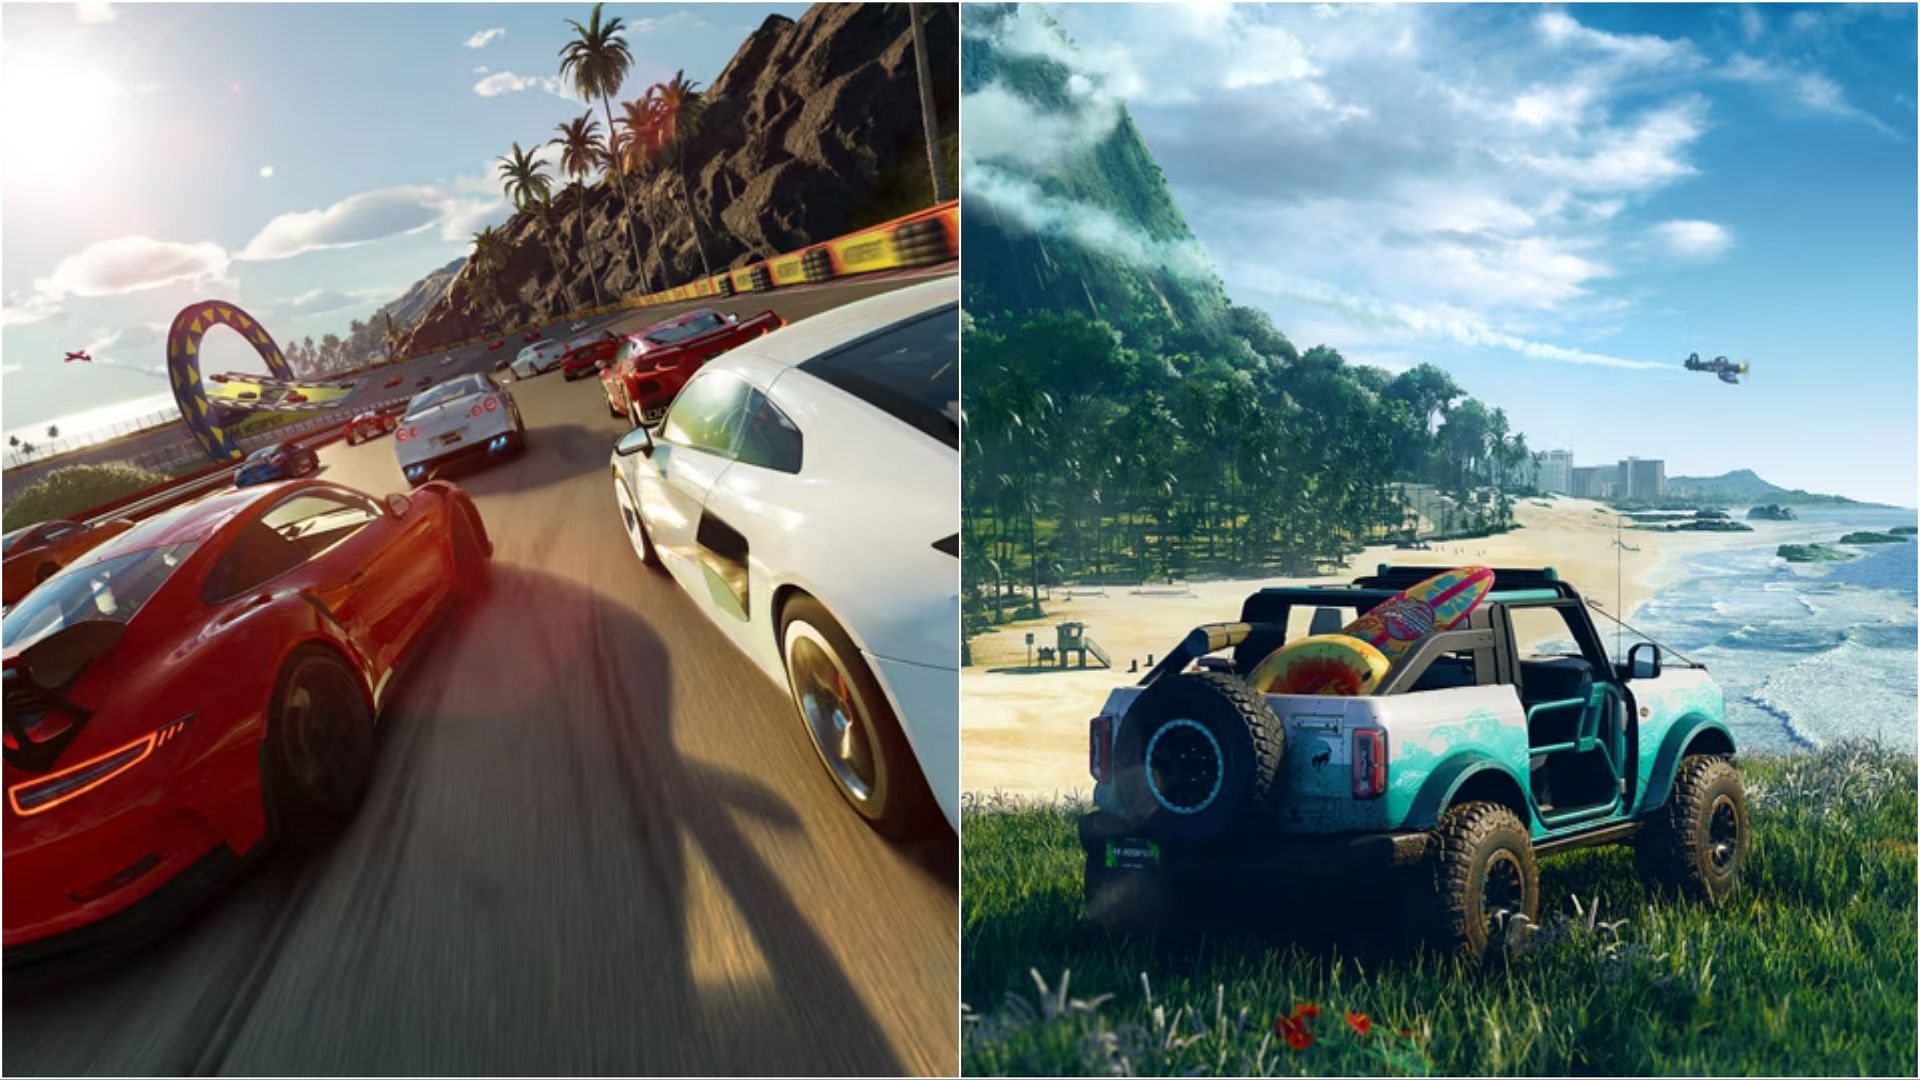 The Crew Motorfest Officially Confirmed By Ubisoft